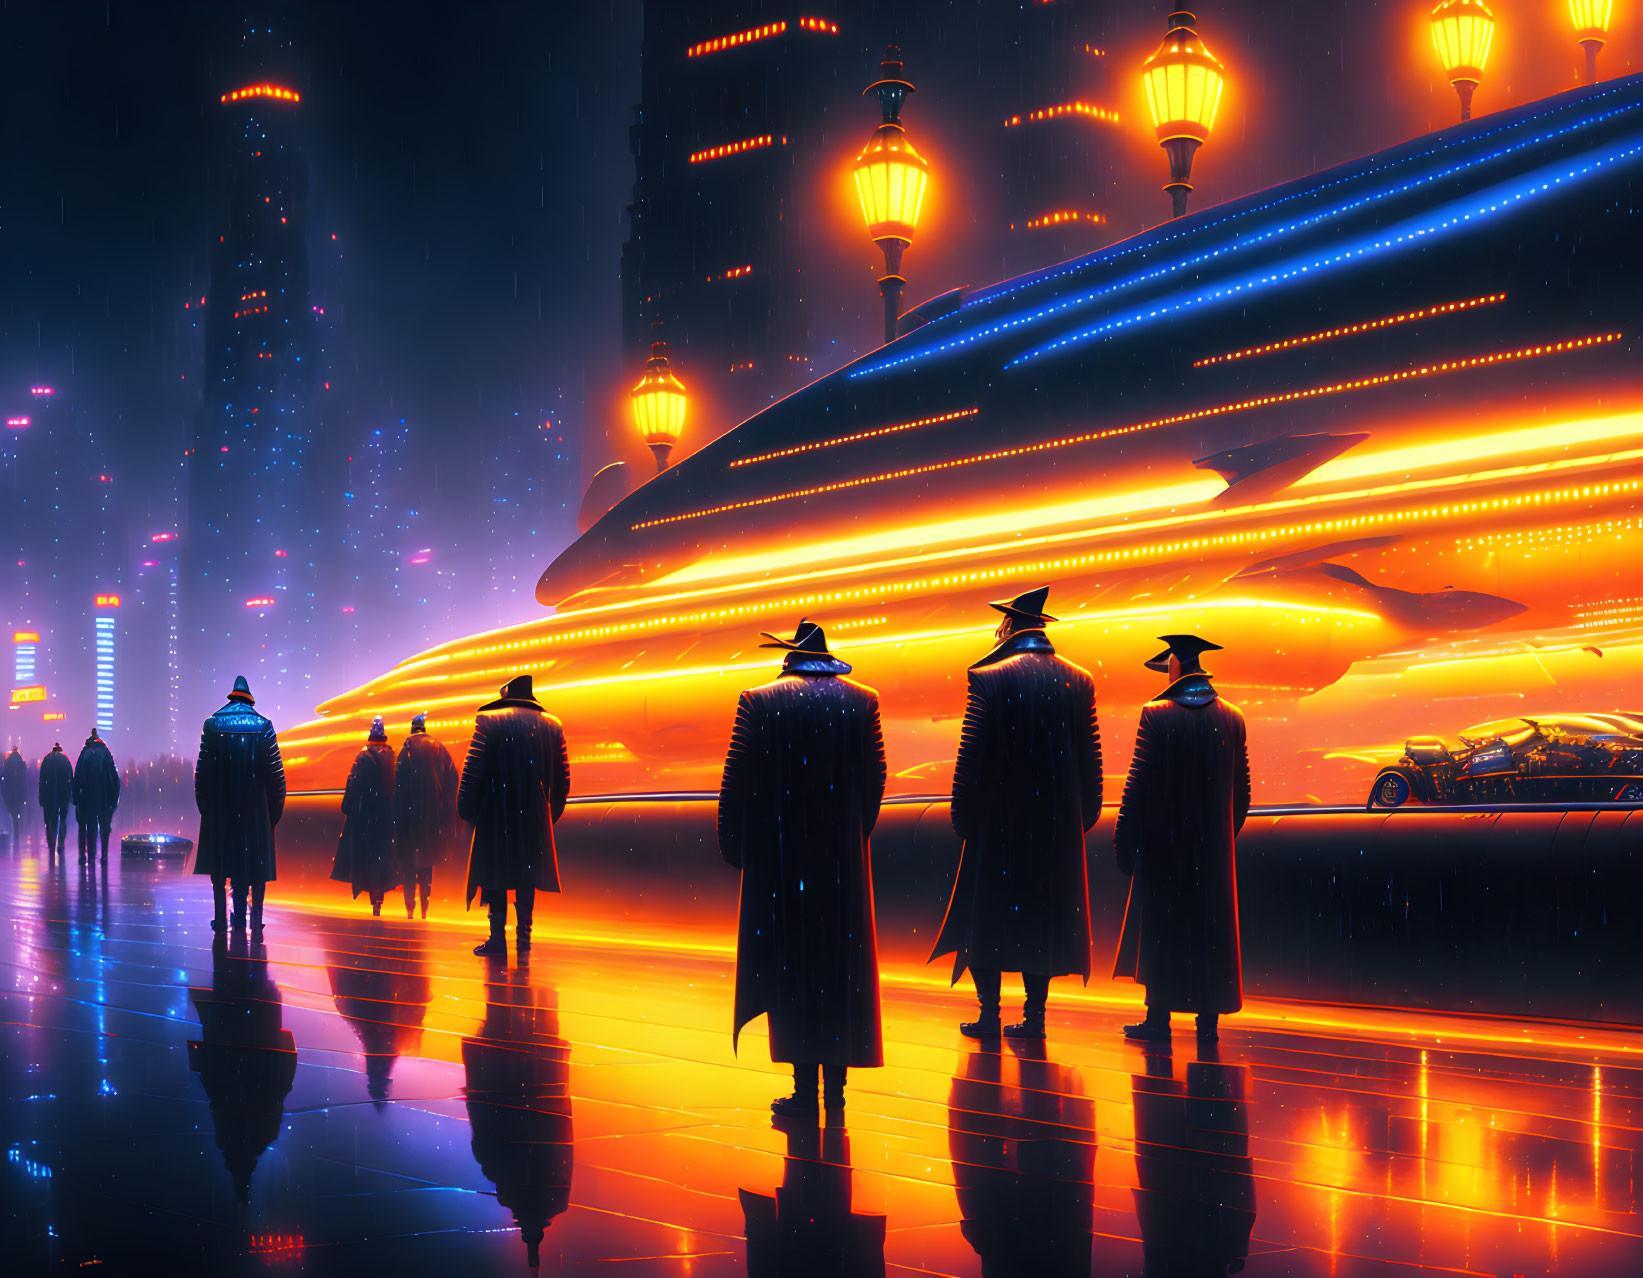 Futuristic cityscape with rain, people in long coats, neon lights, and speeding train